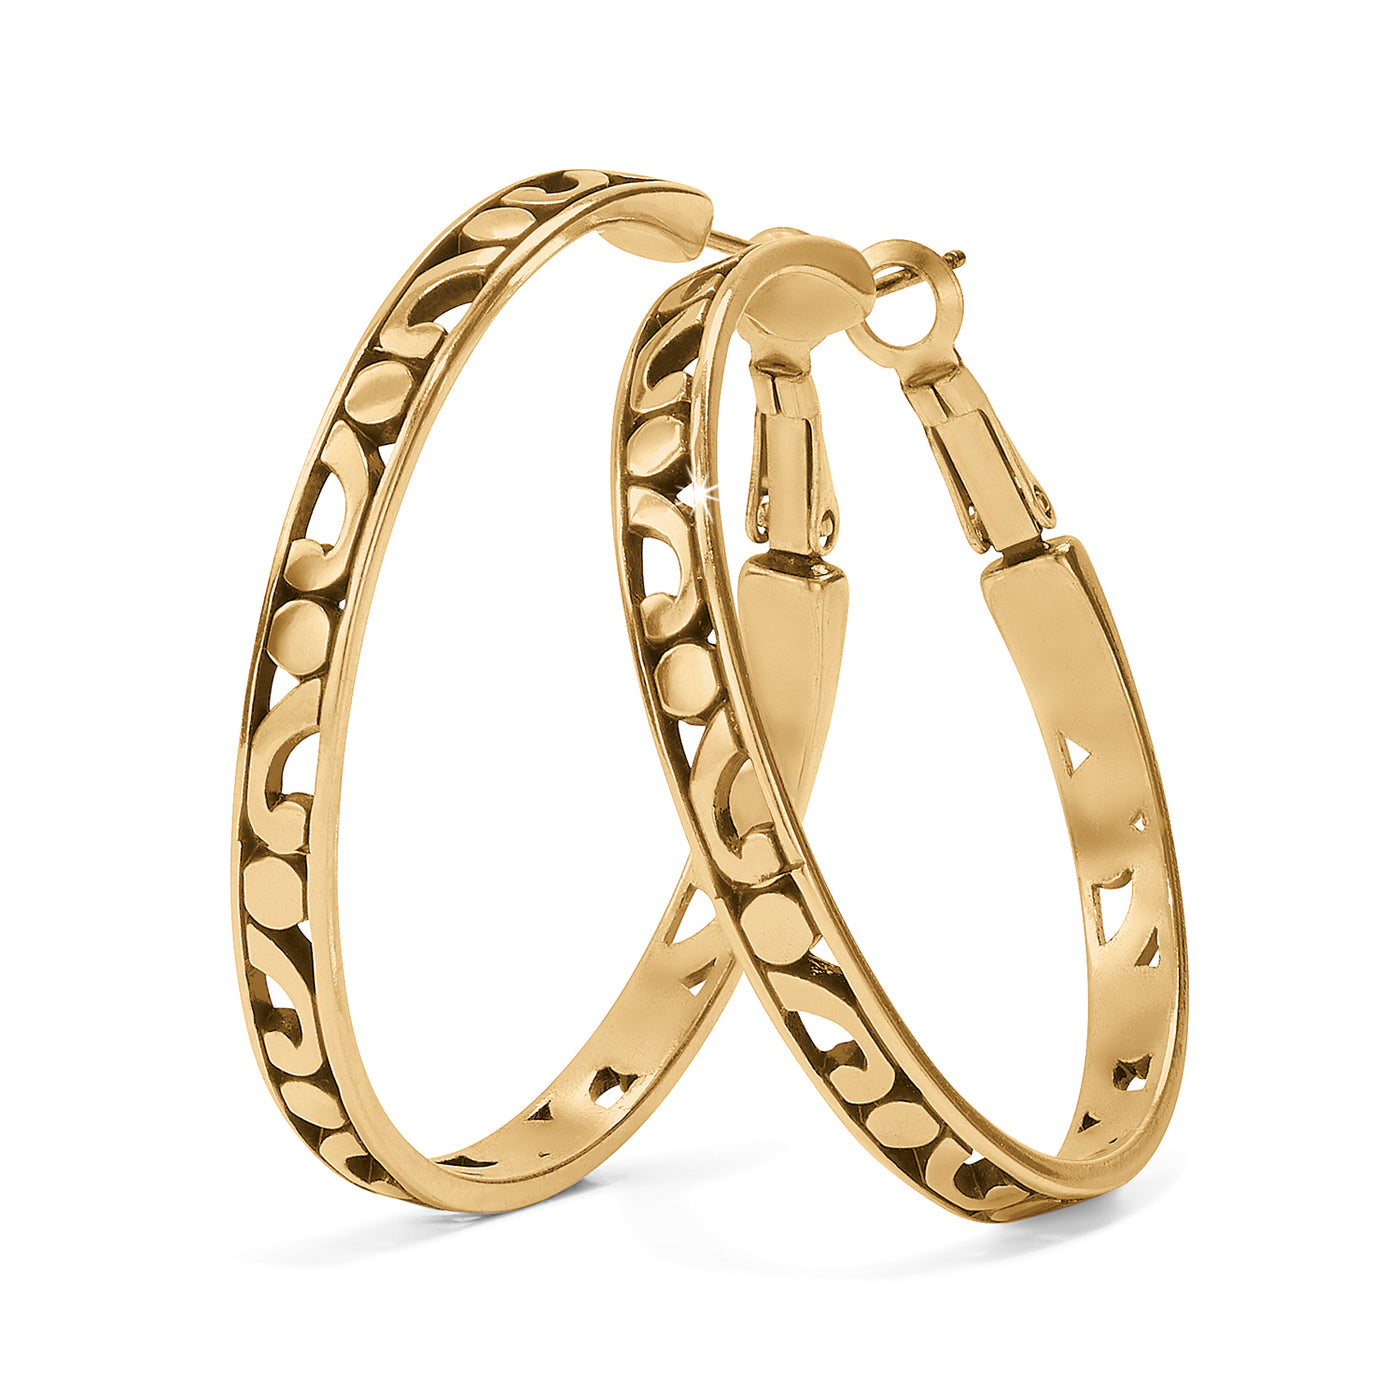 CONTEMPO LARGE HOOP EARRINGS GOLD